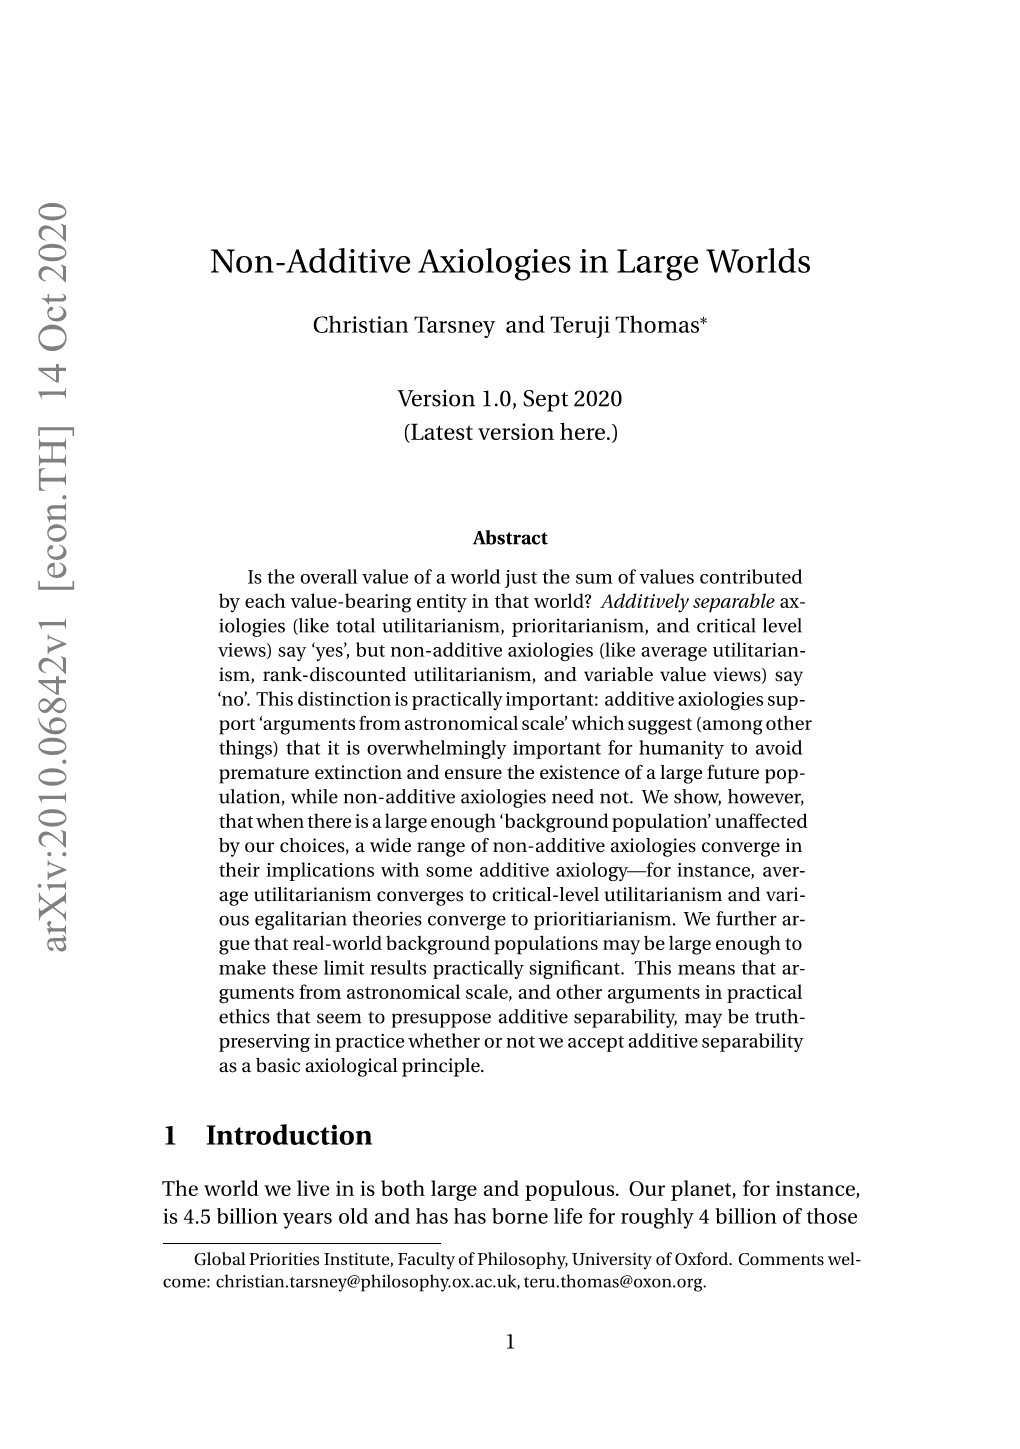 Non-Additive Axiologies in Large Worlds